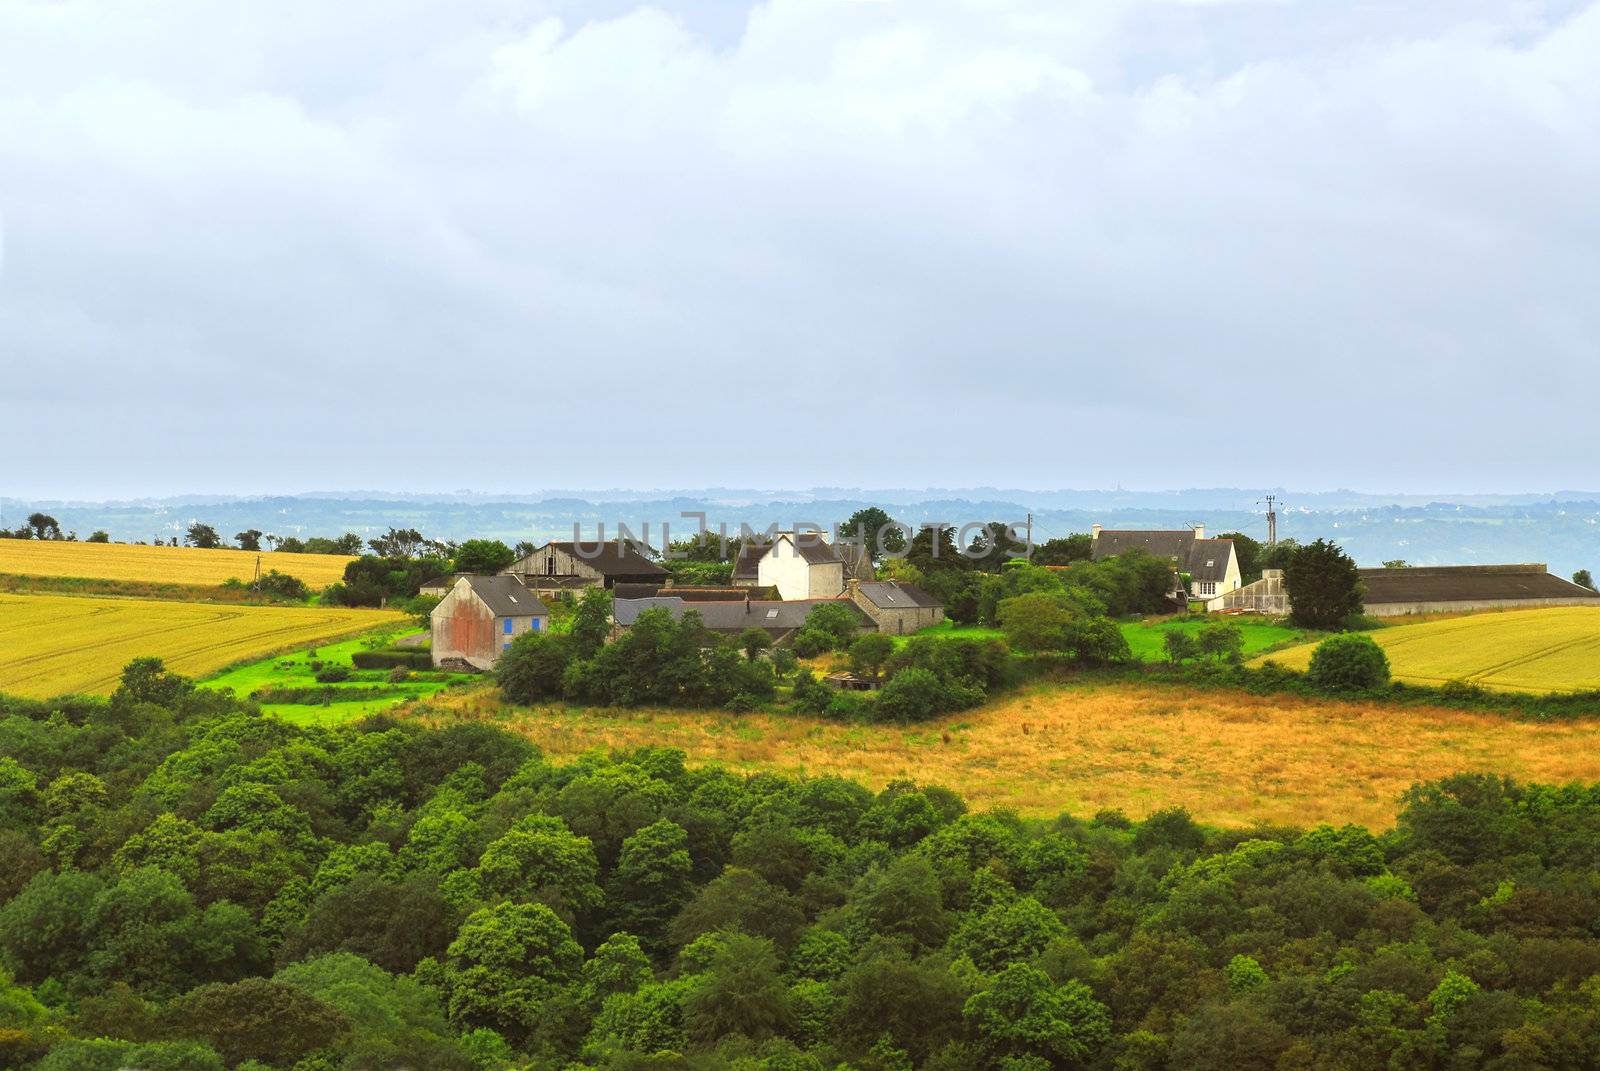 Scenic view on agricultural landscape with a farm house in rural Brittany, France